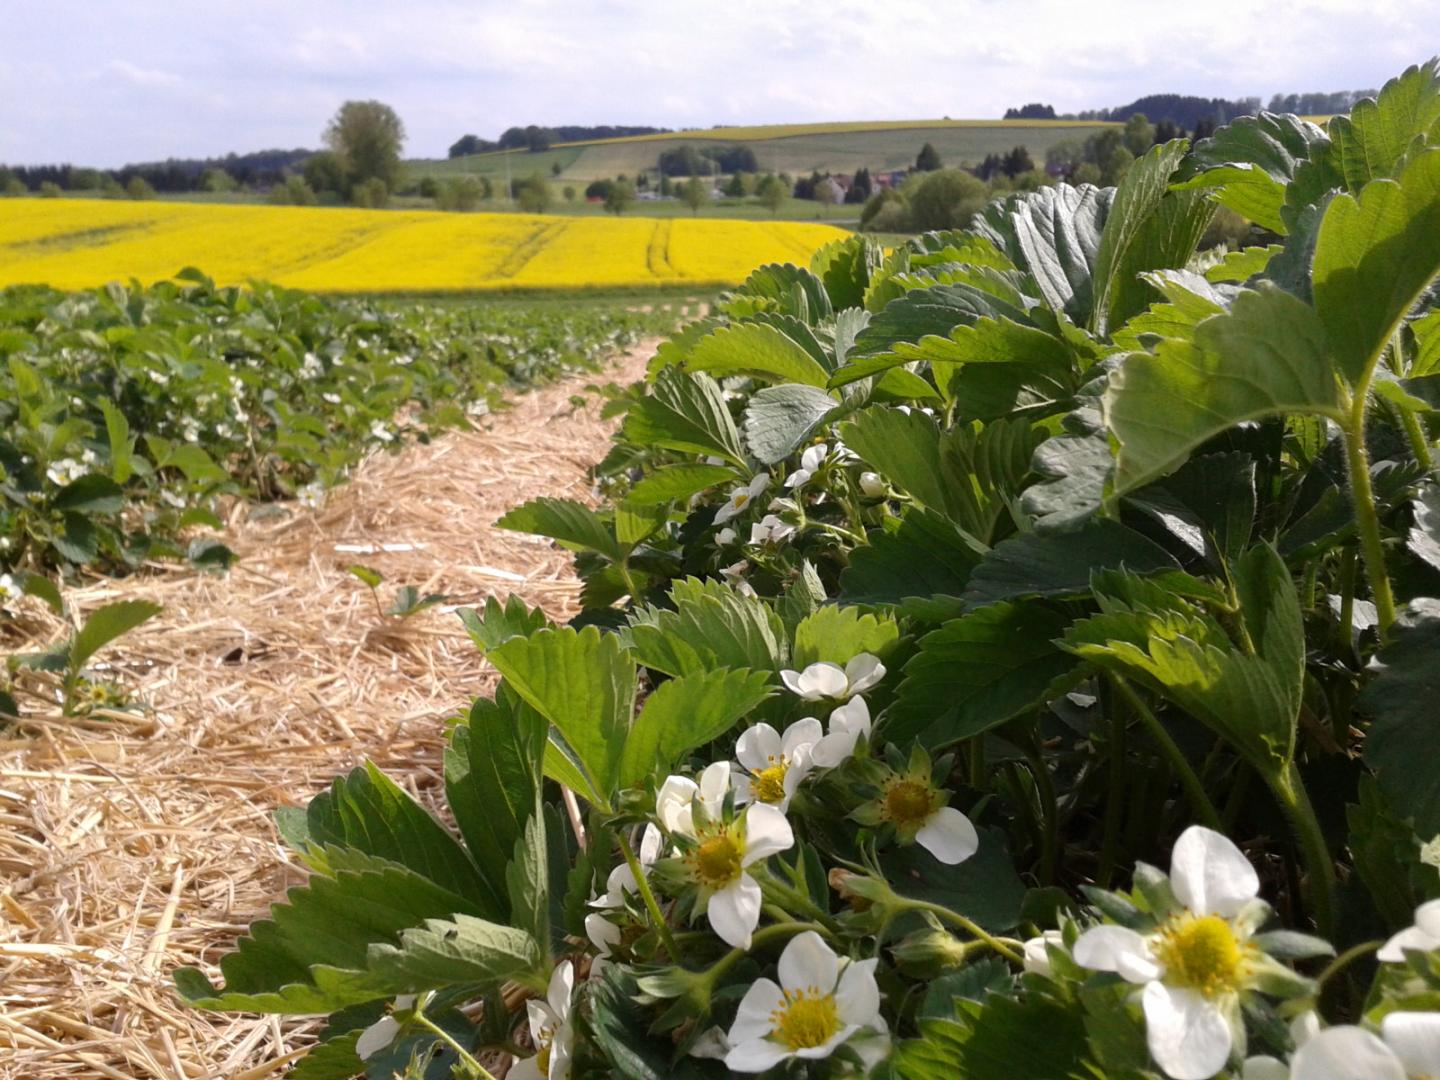 Countryside Showing Oilseed Rape in the Background and Strawberry Flowers at the Front